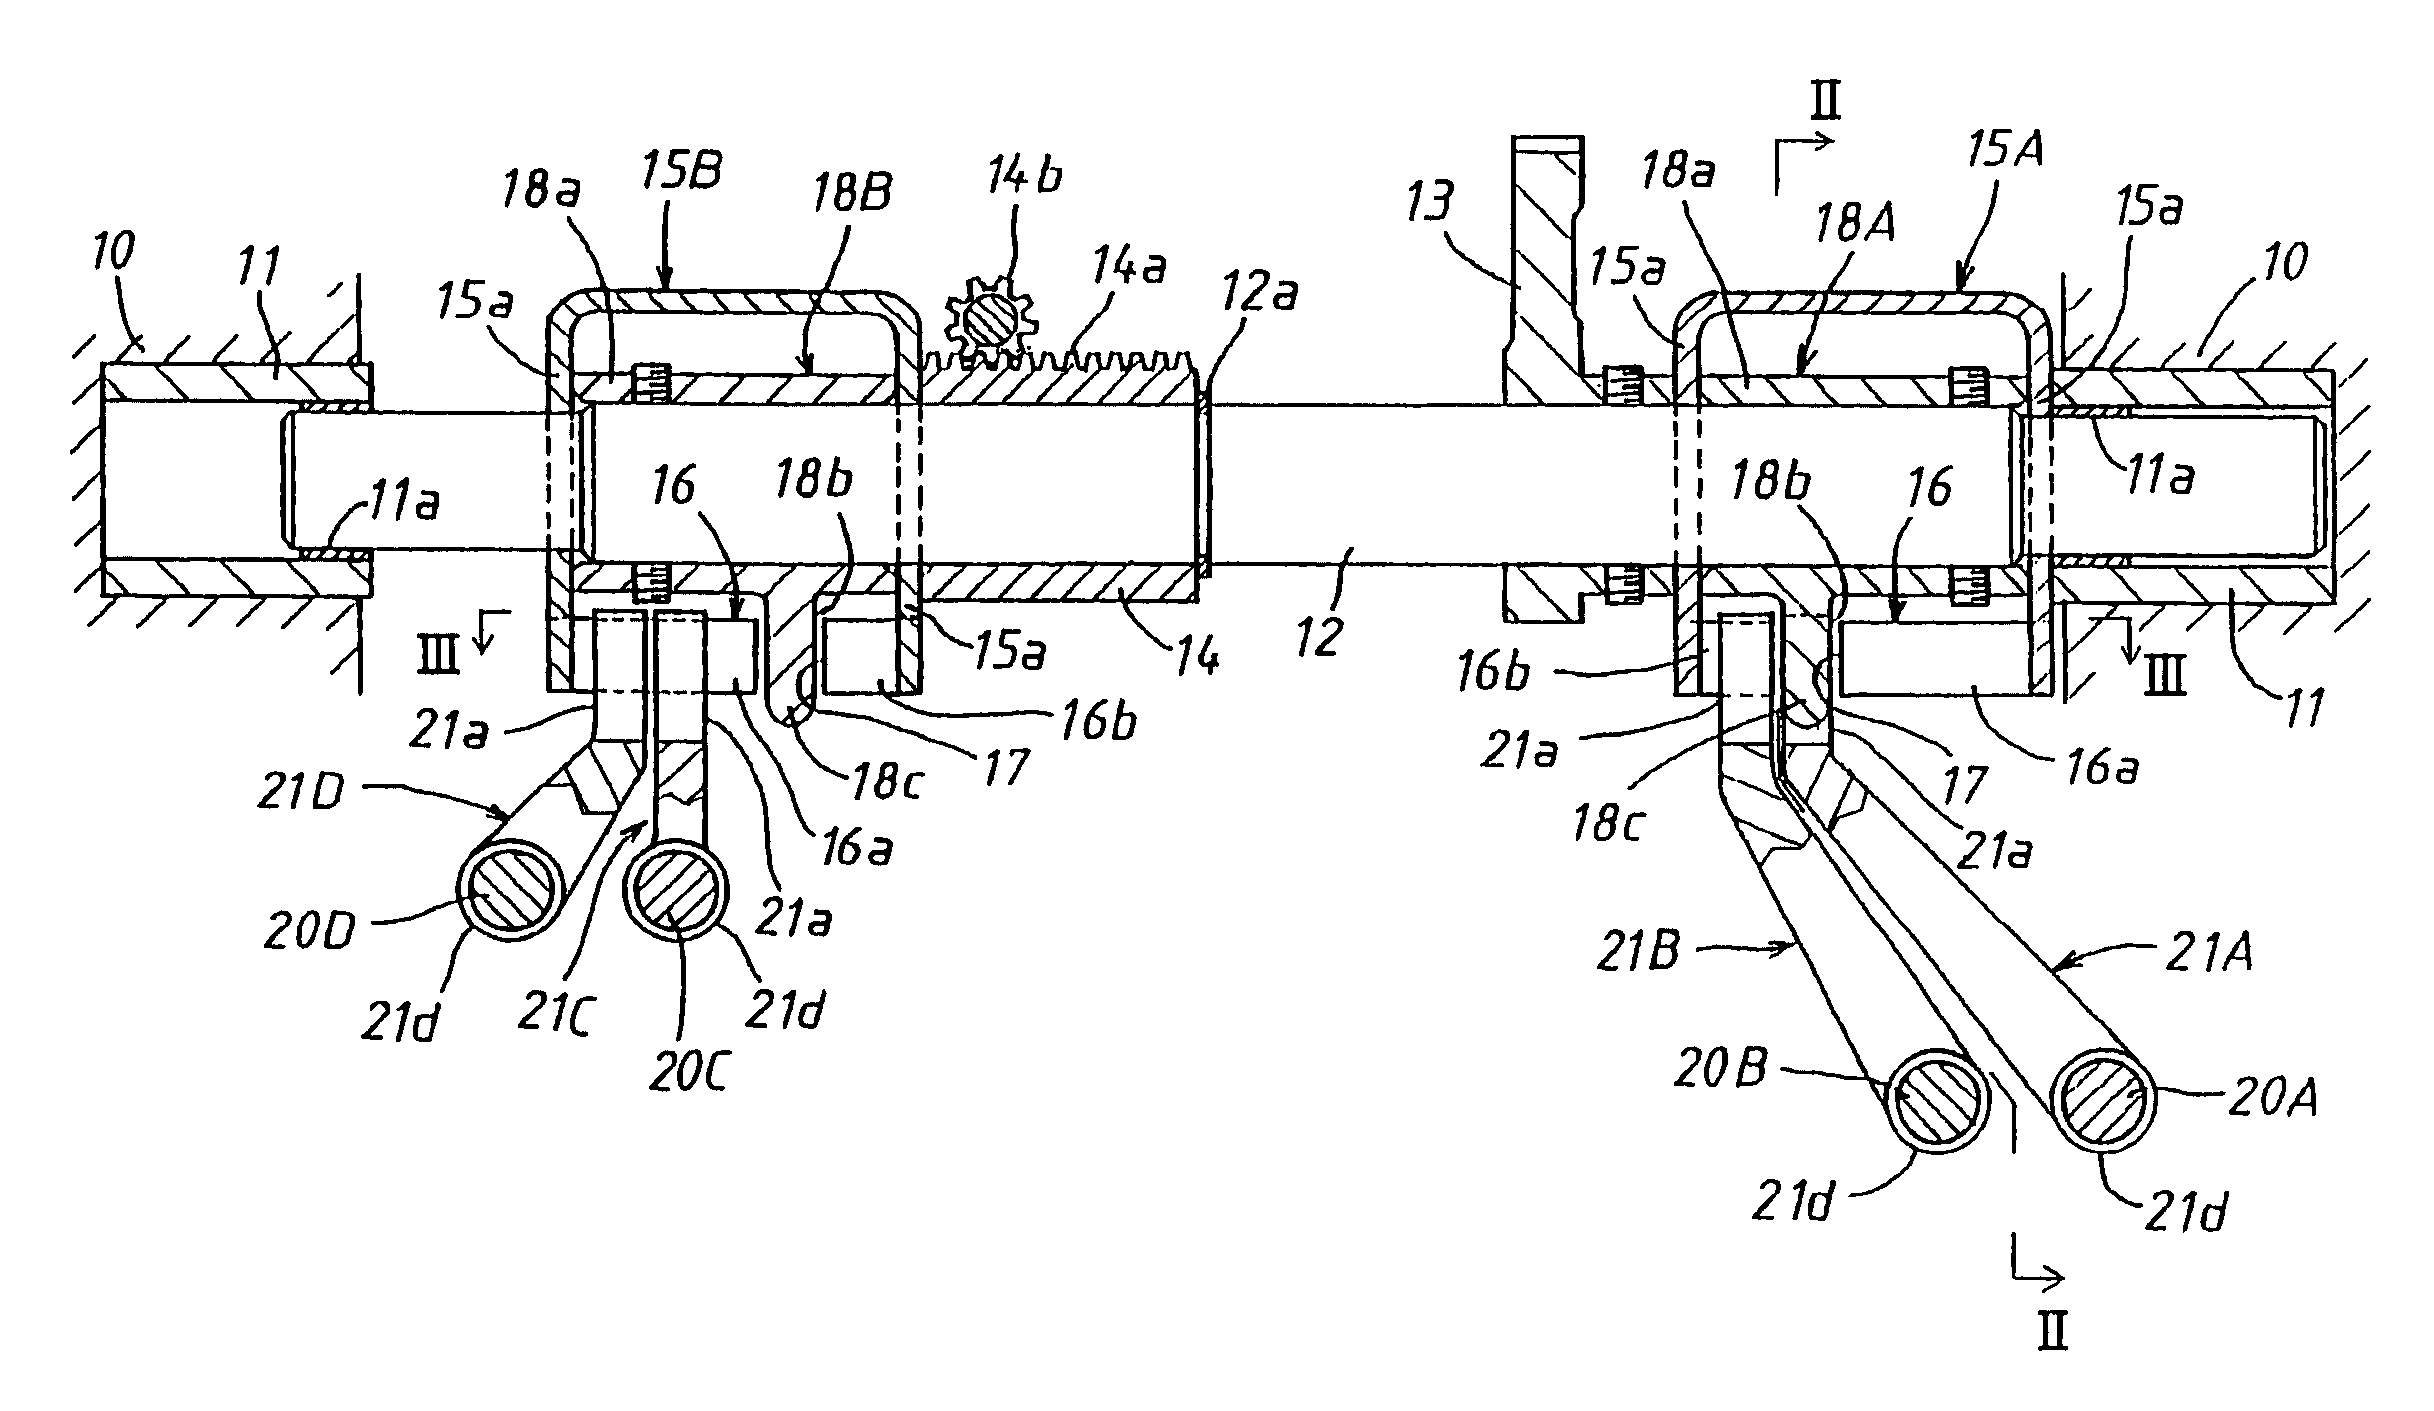 Gearing and power transmission apparatus